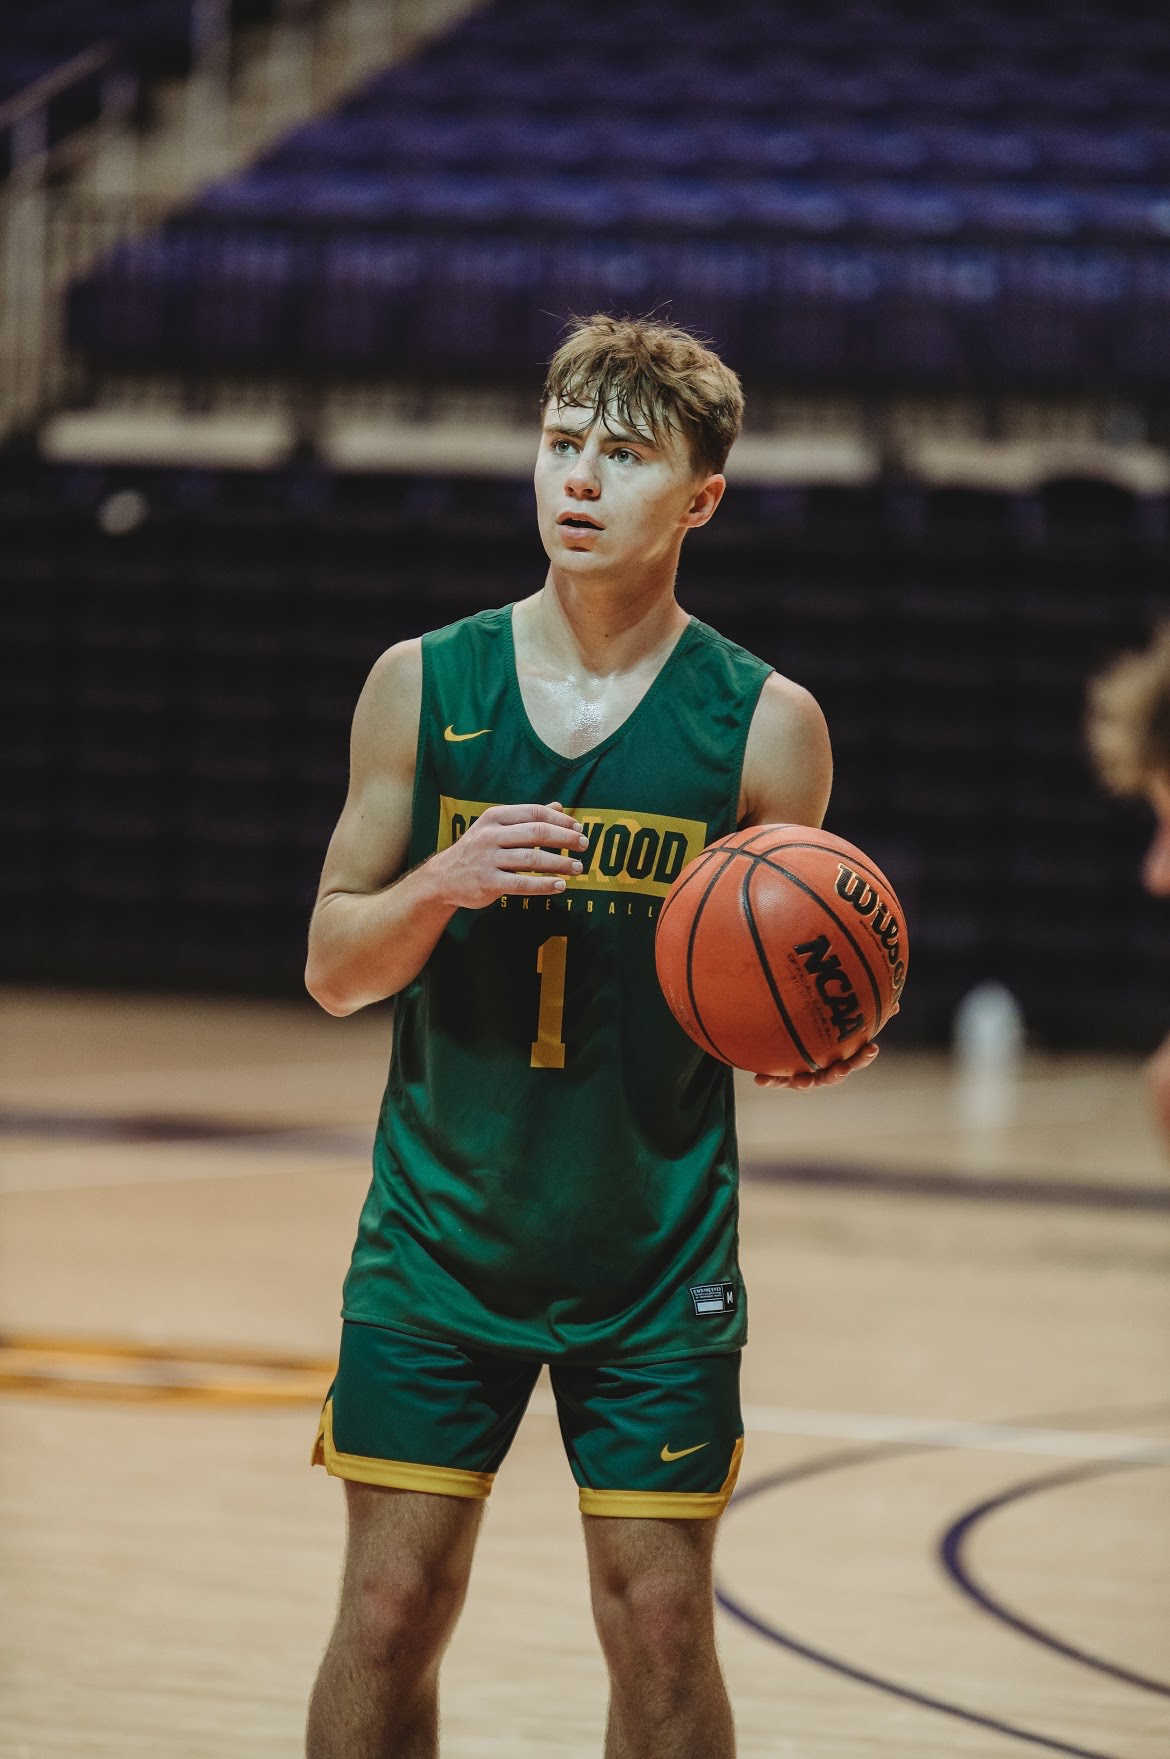 Recruiting Update: Several 2022 Commitments - Prep Hoops